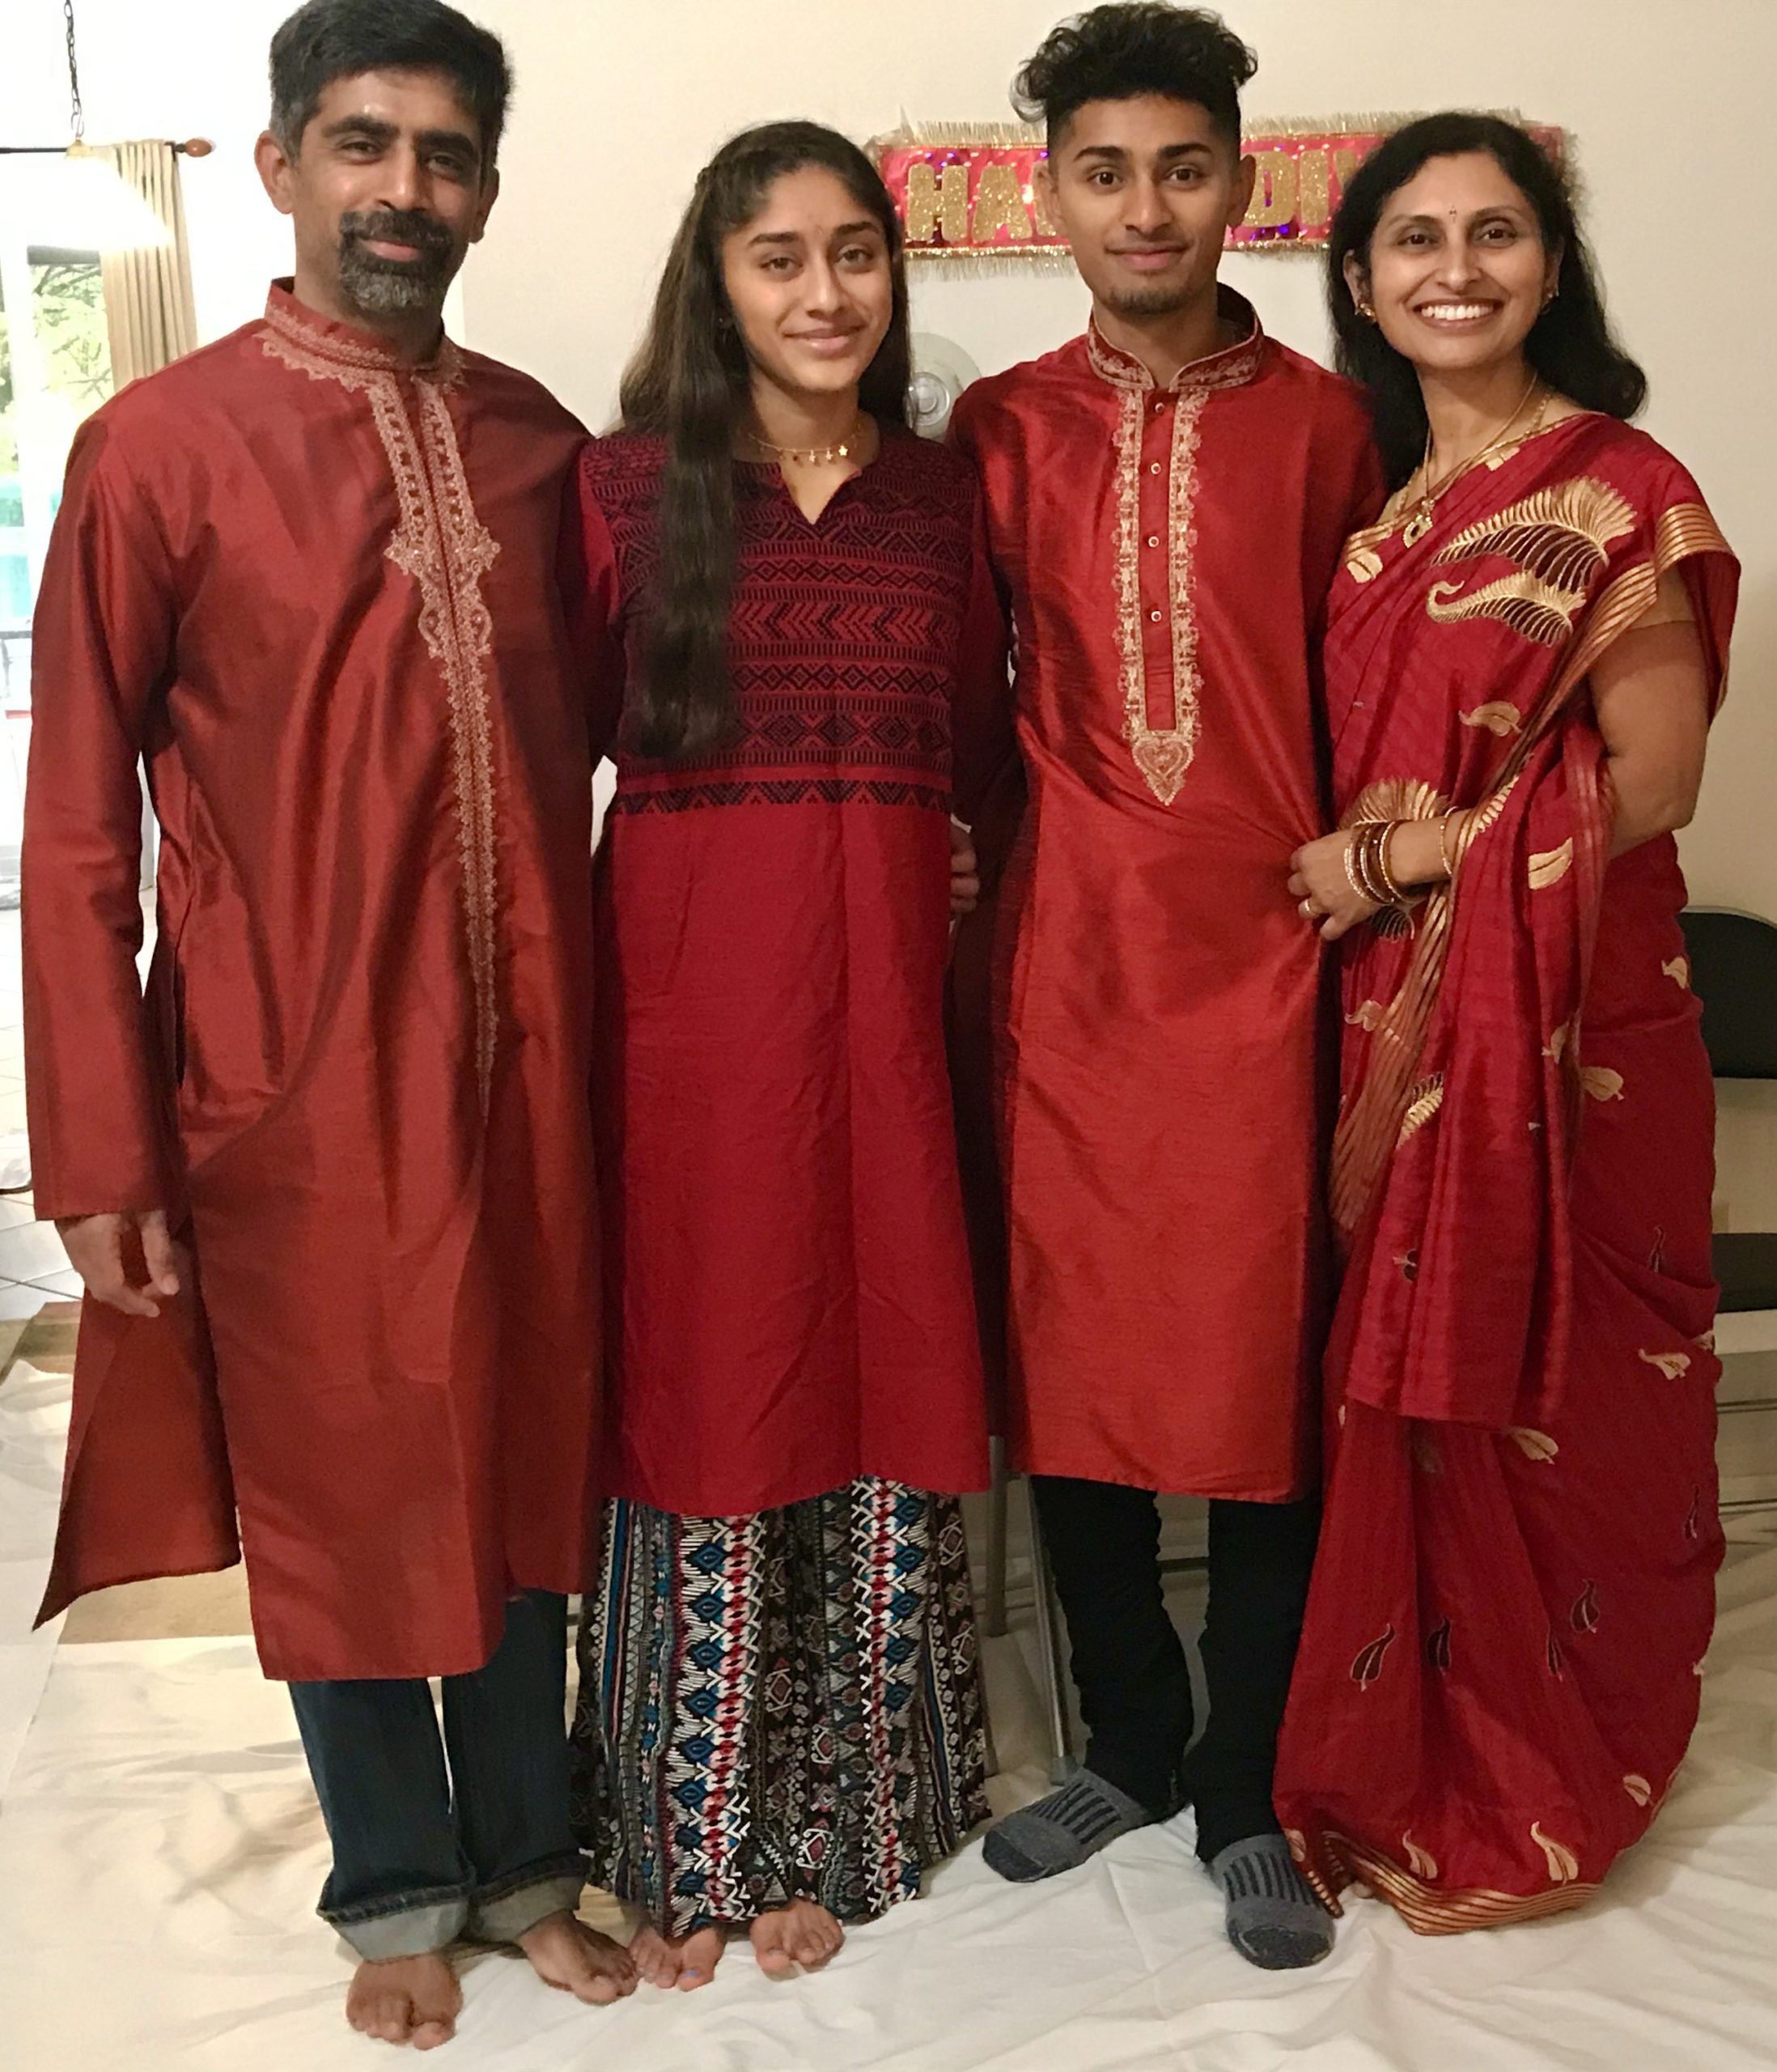 a family standing together and smiling